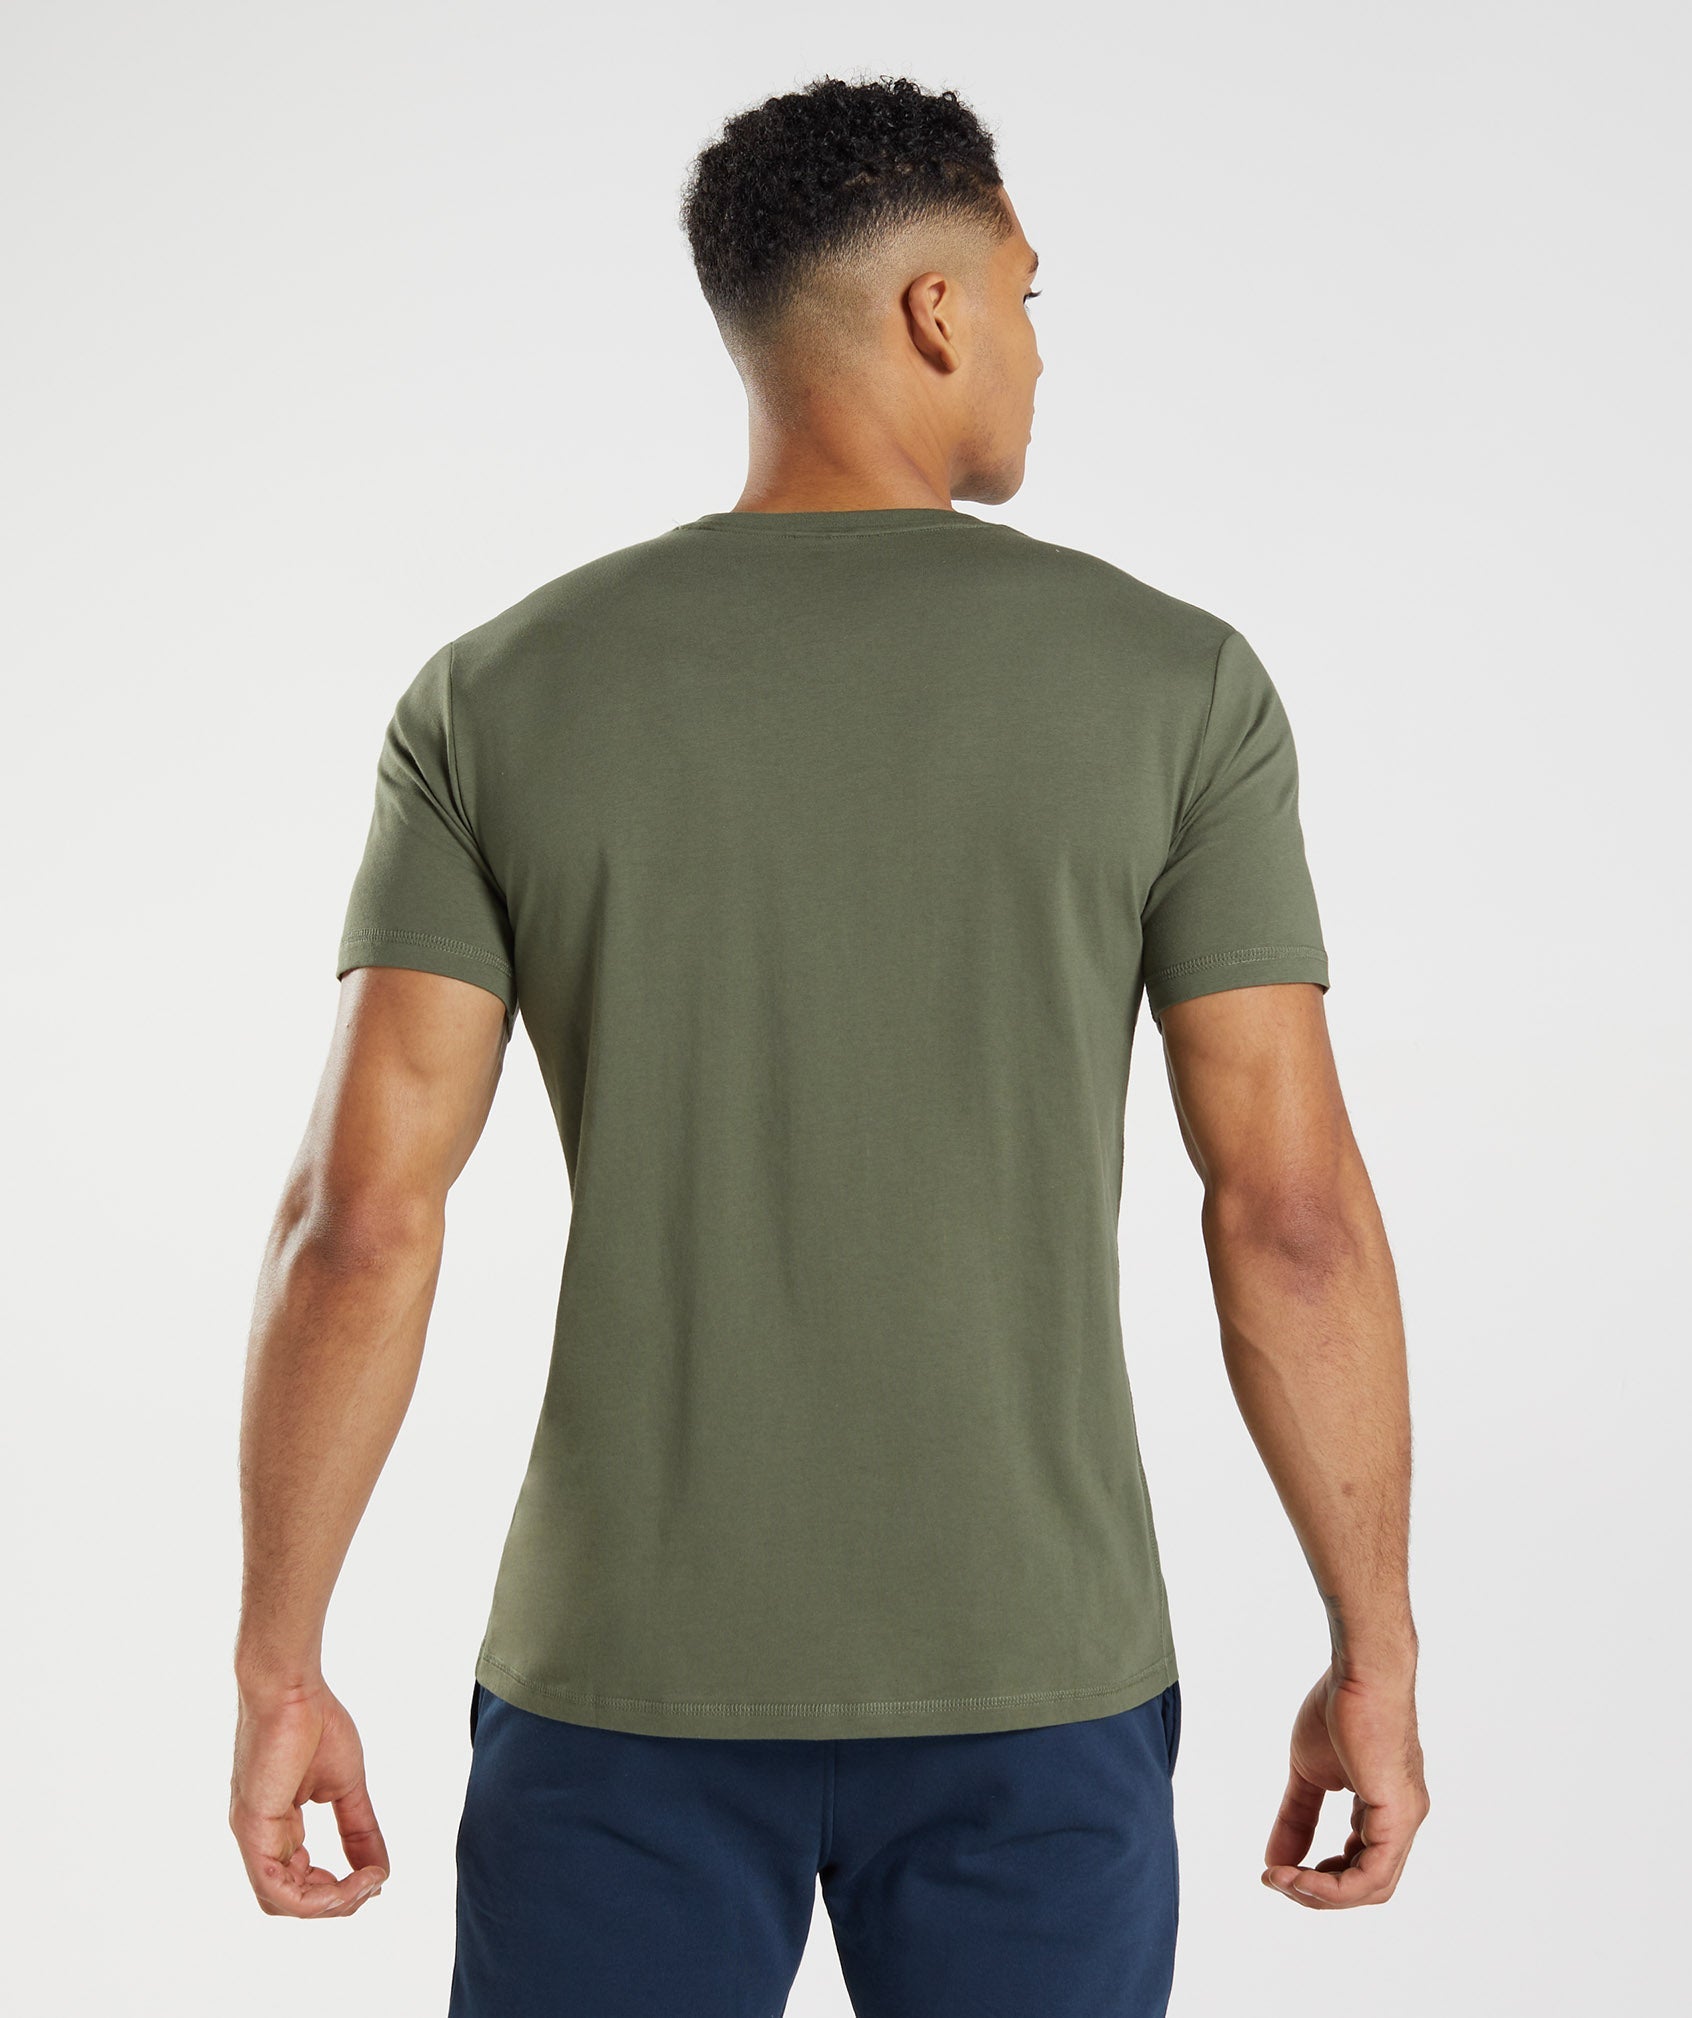 Sharkhead Infill T-Shirt in Core Olive